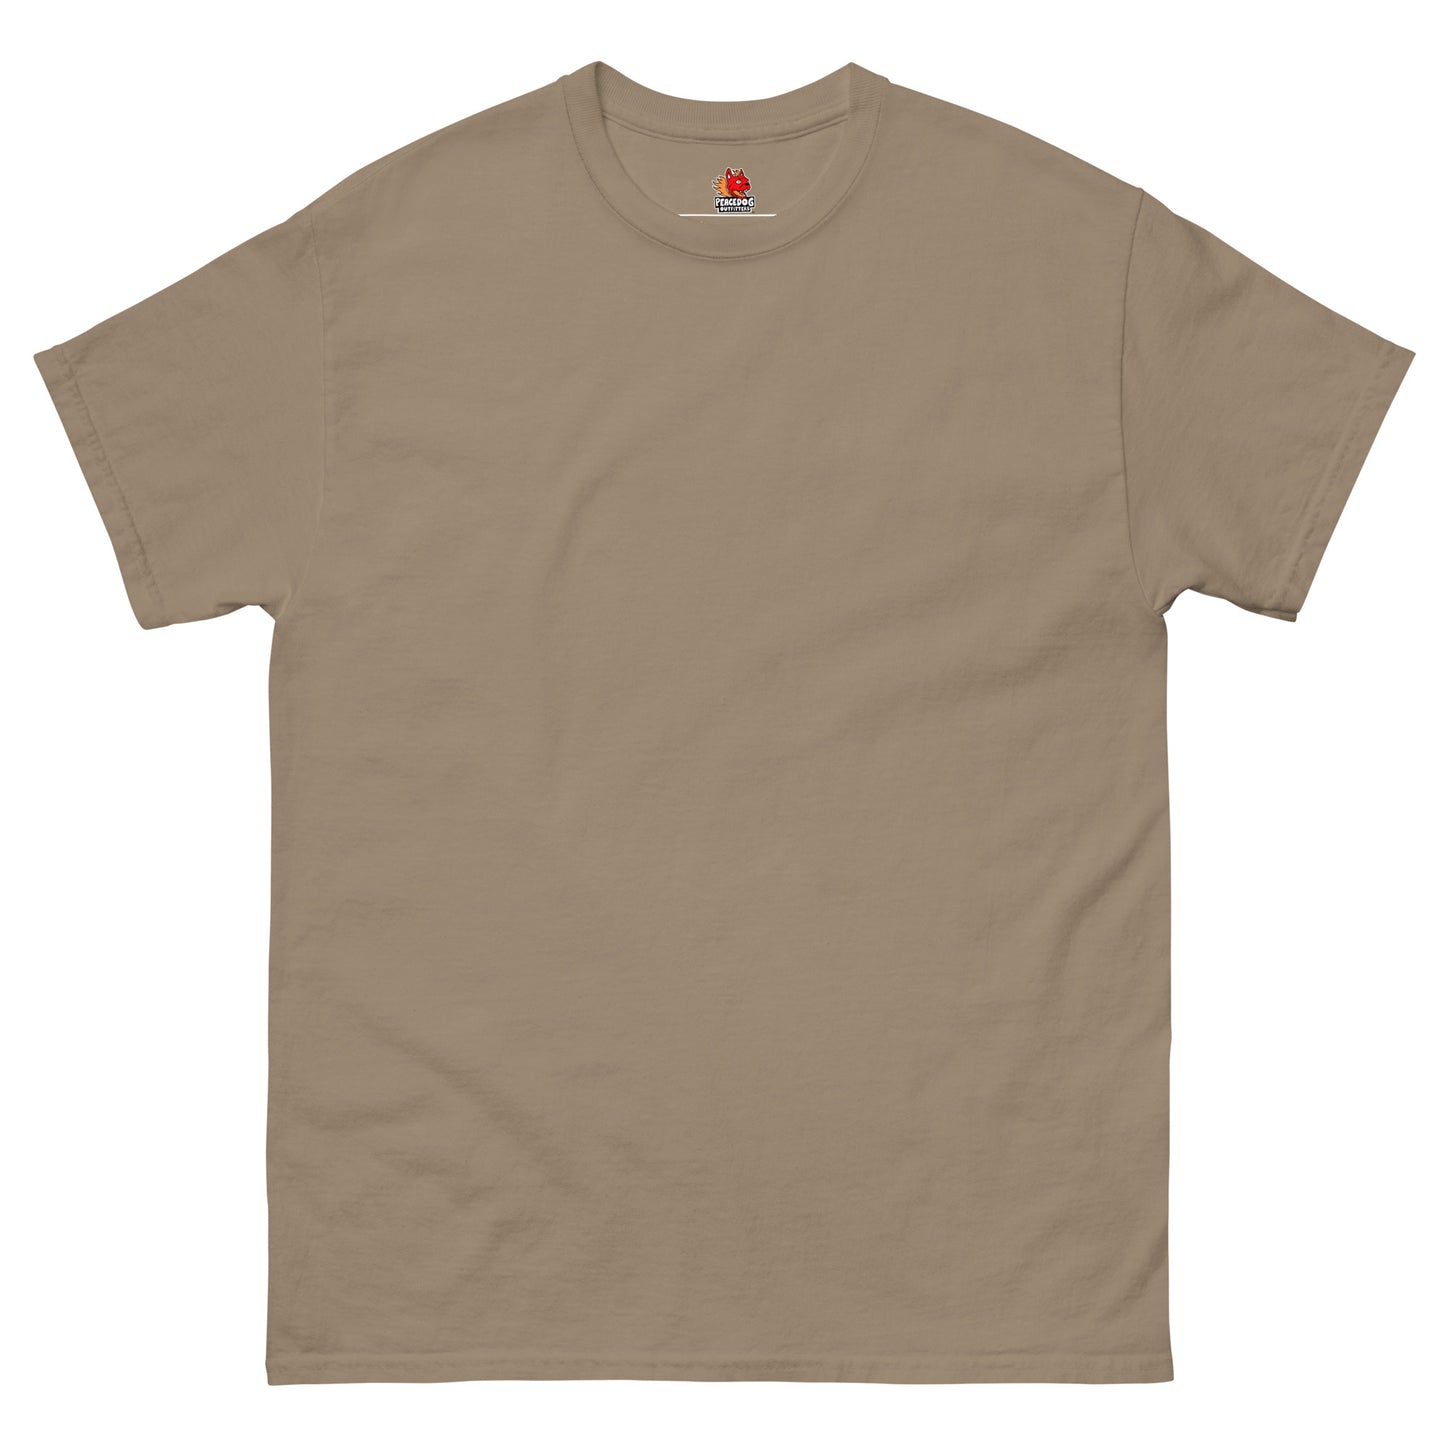 Yellowstone Park Summer Employee classic tee - Grizzly Bear